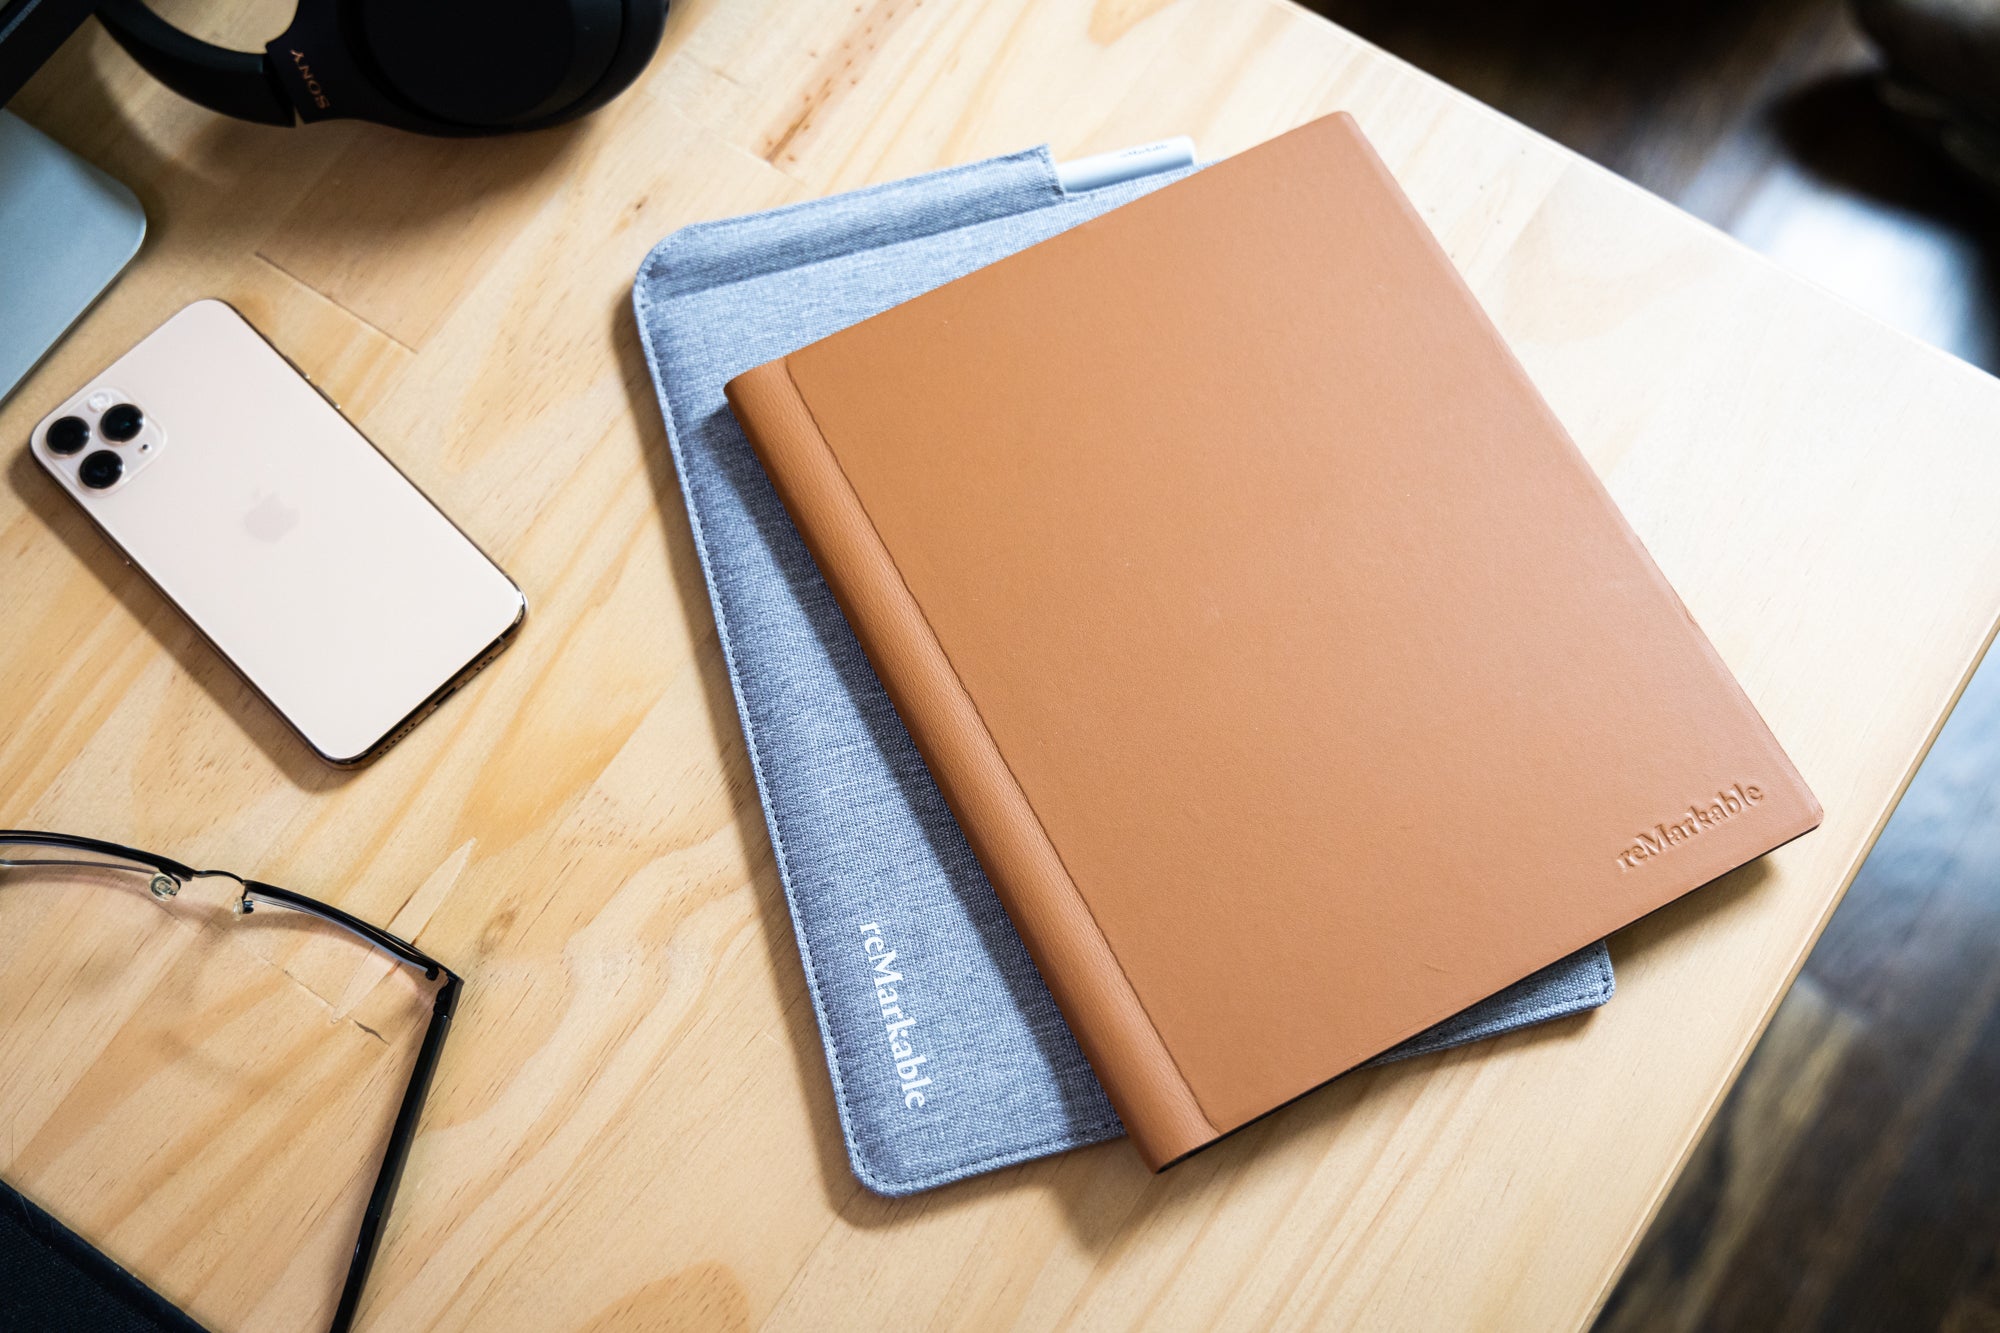 reMarkable 2 review: A ‘paper tablet’ that can replace notebooks | Macworld